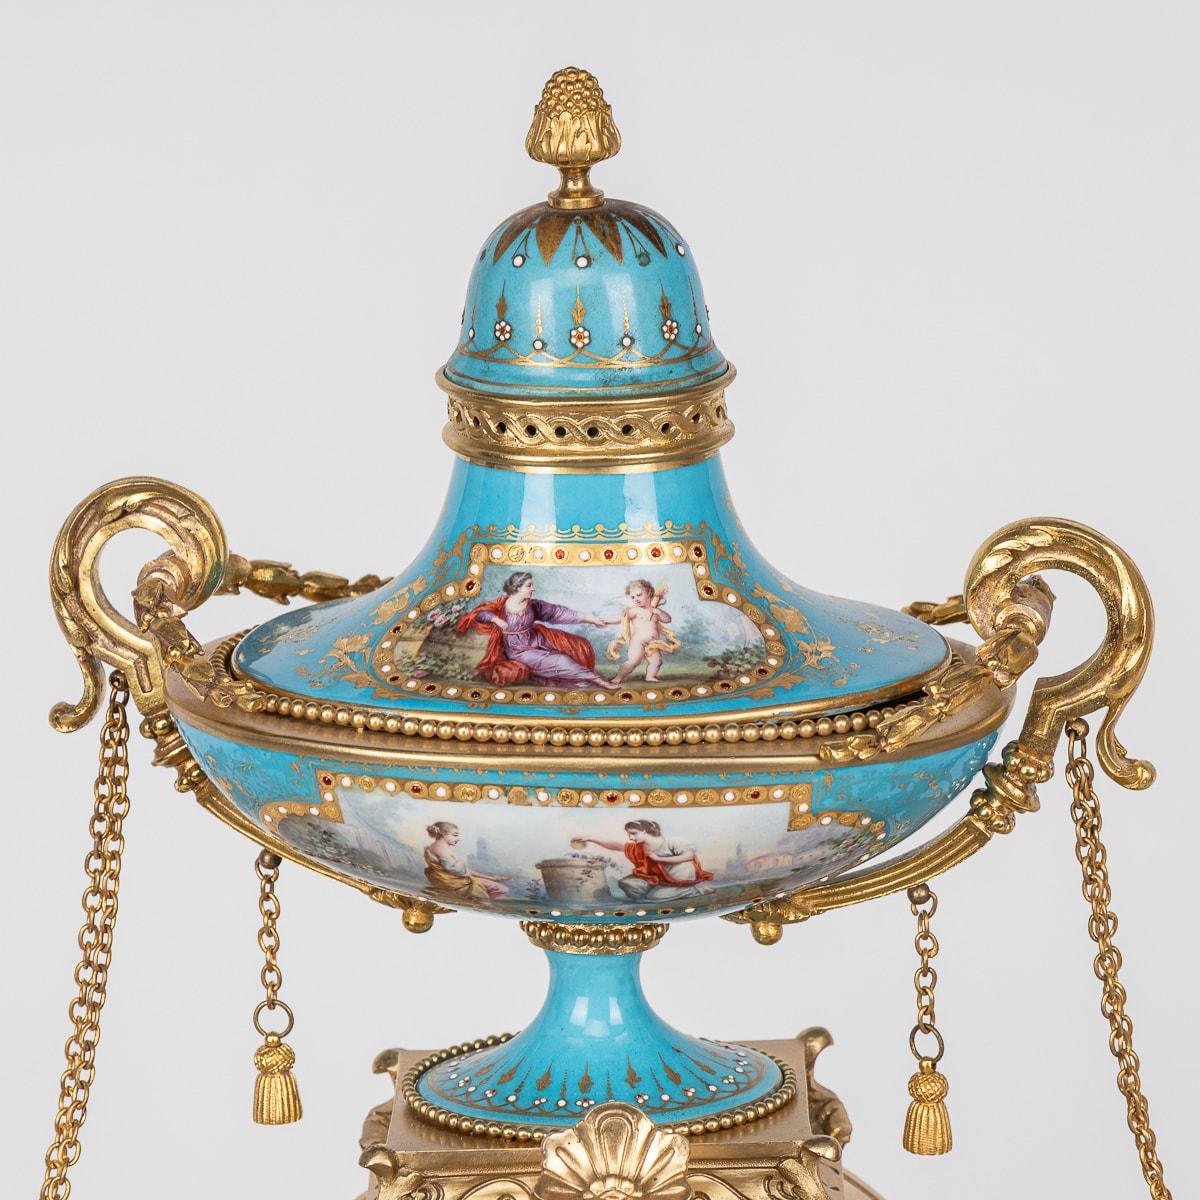 Late 19th Century 19th Century French Ormolu Mounted Sevres Style Porcelain Mantle Clock c.1870 For Sale